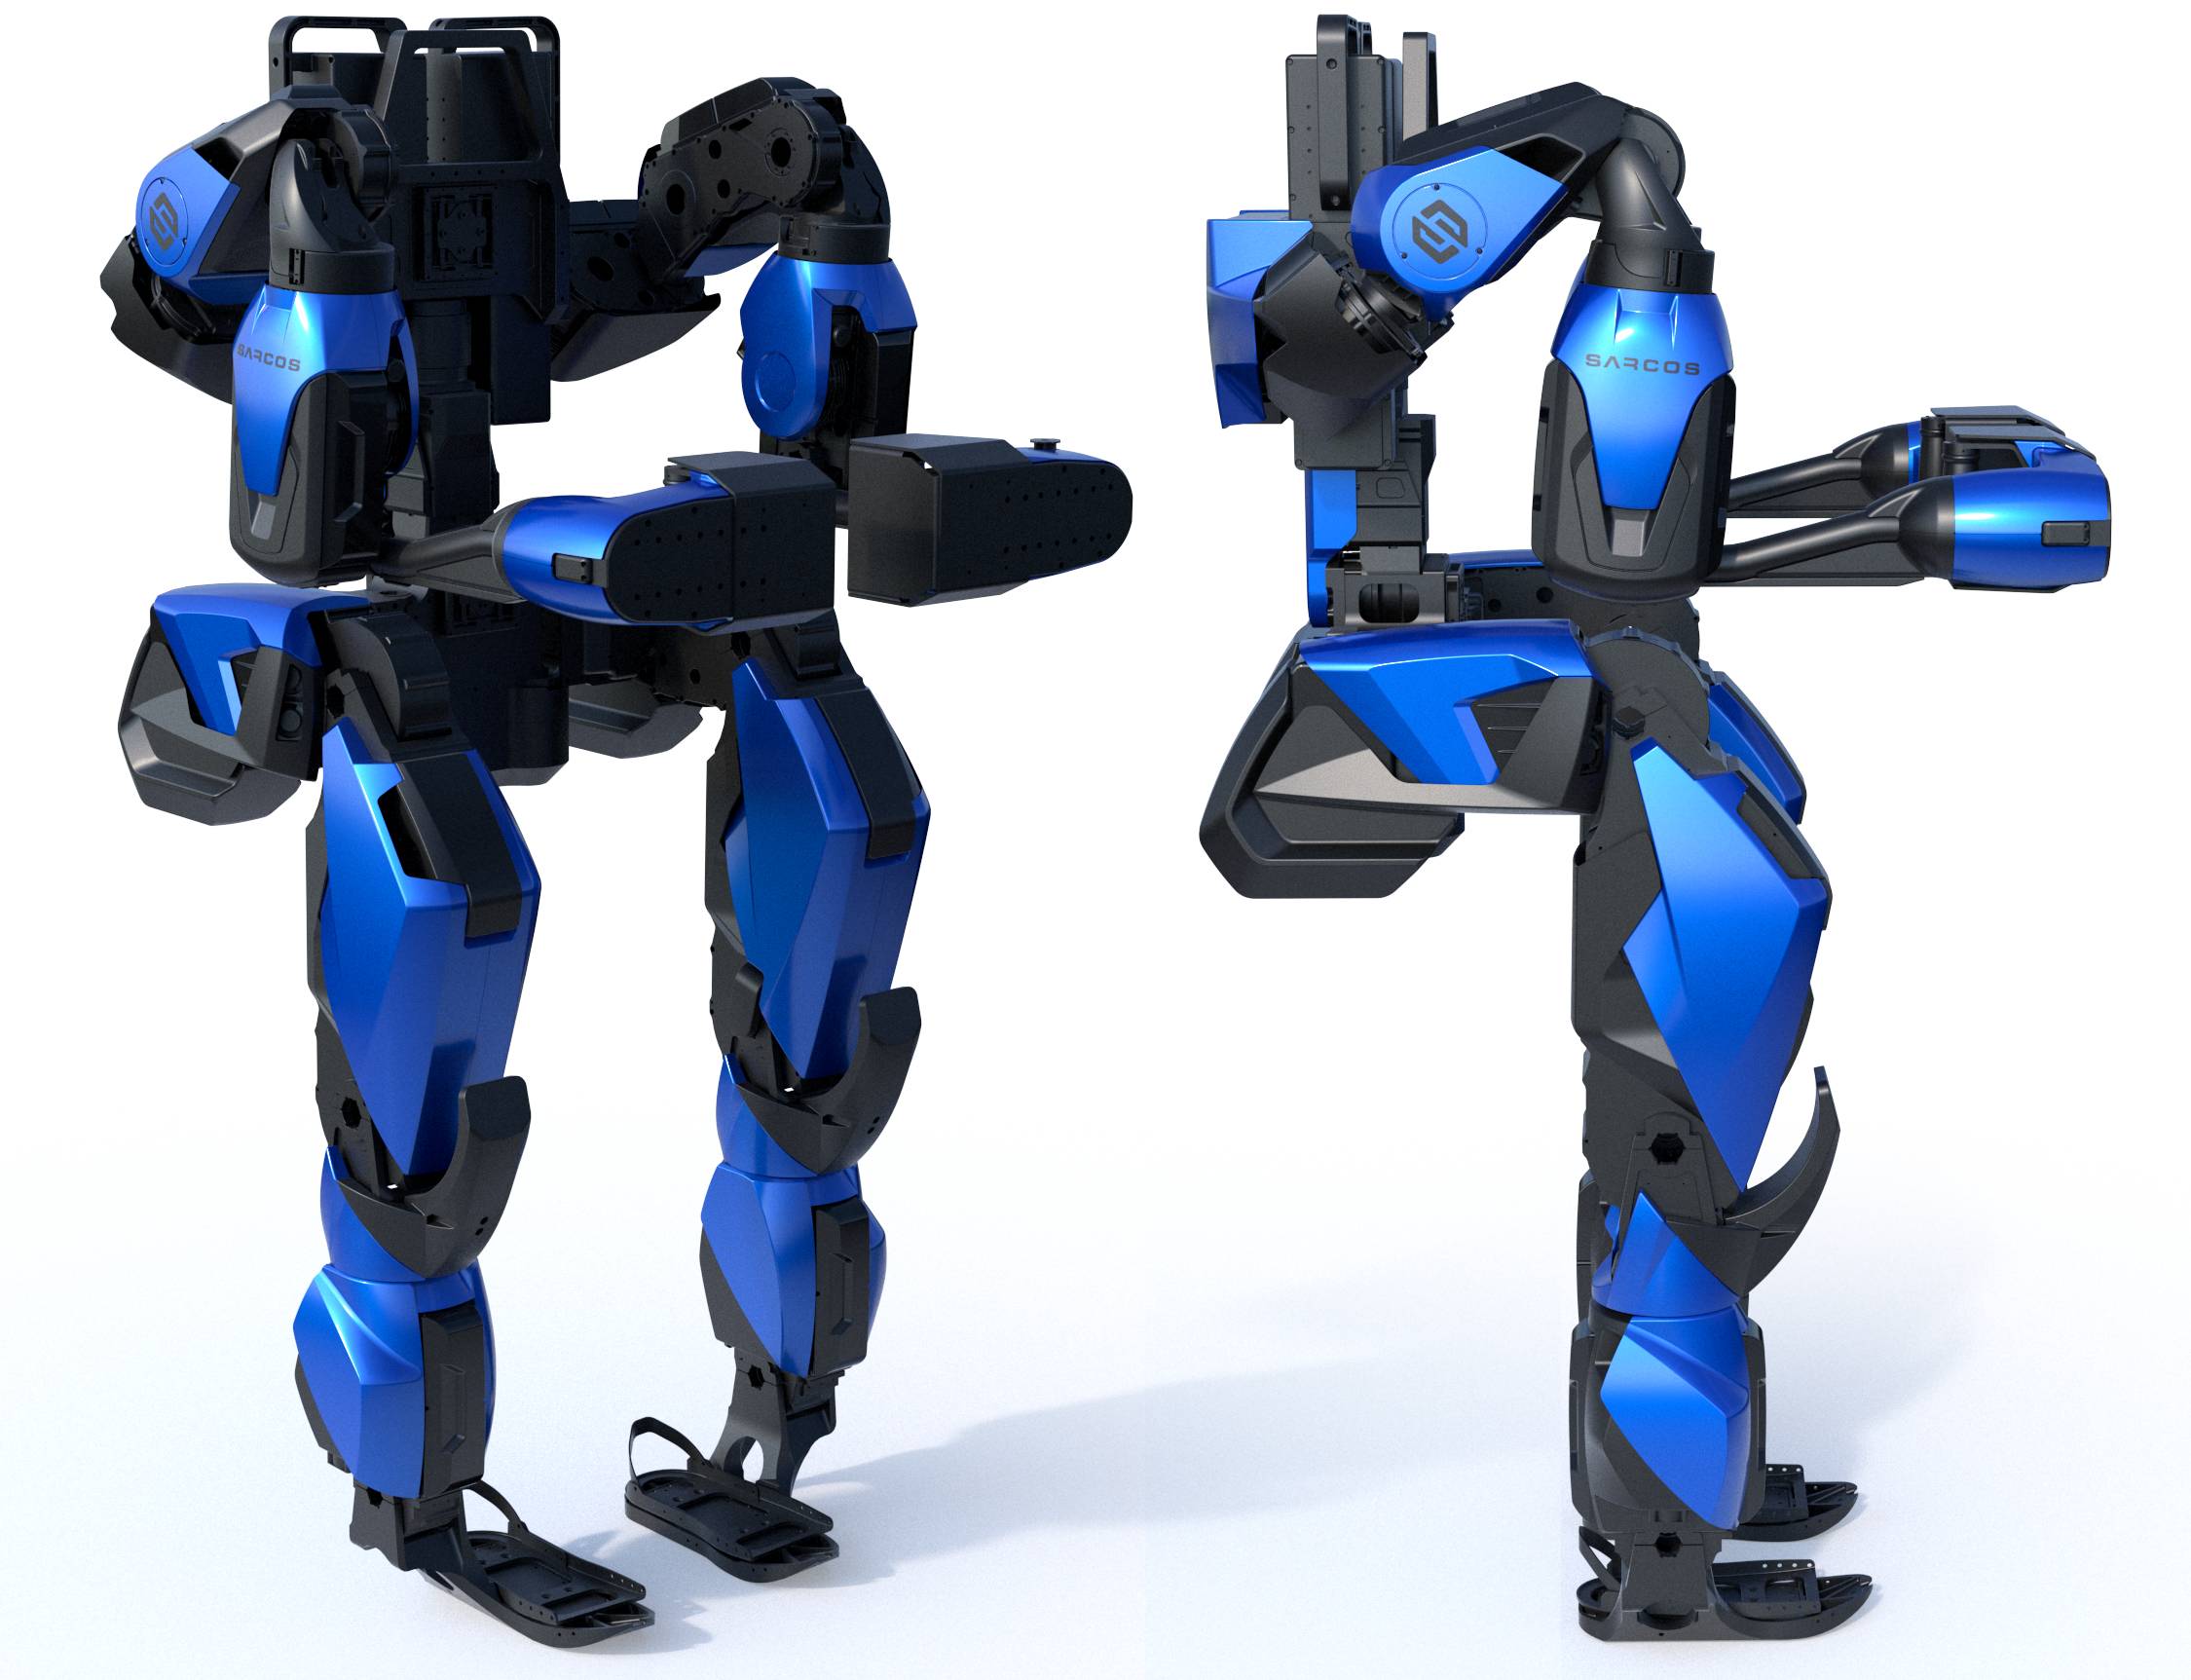 Resten fure Imagination Sarcos Demonstrates Powered Exosuit That Gives Workers Super Strength -  IEEE Spectrum